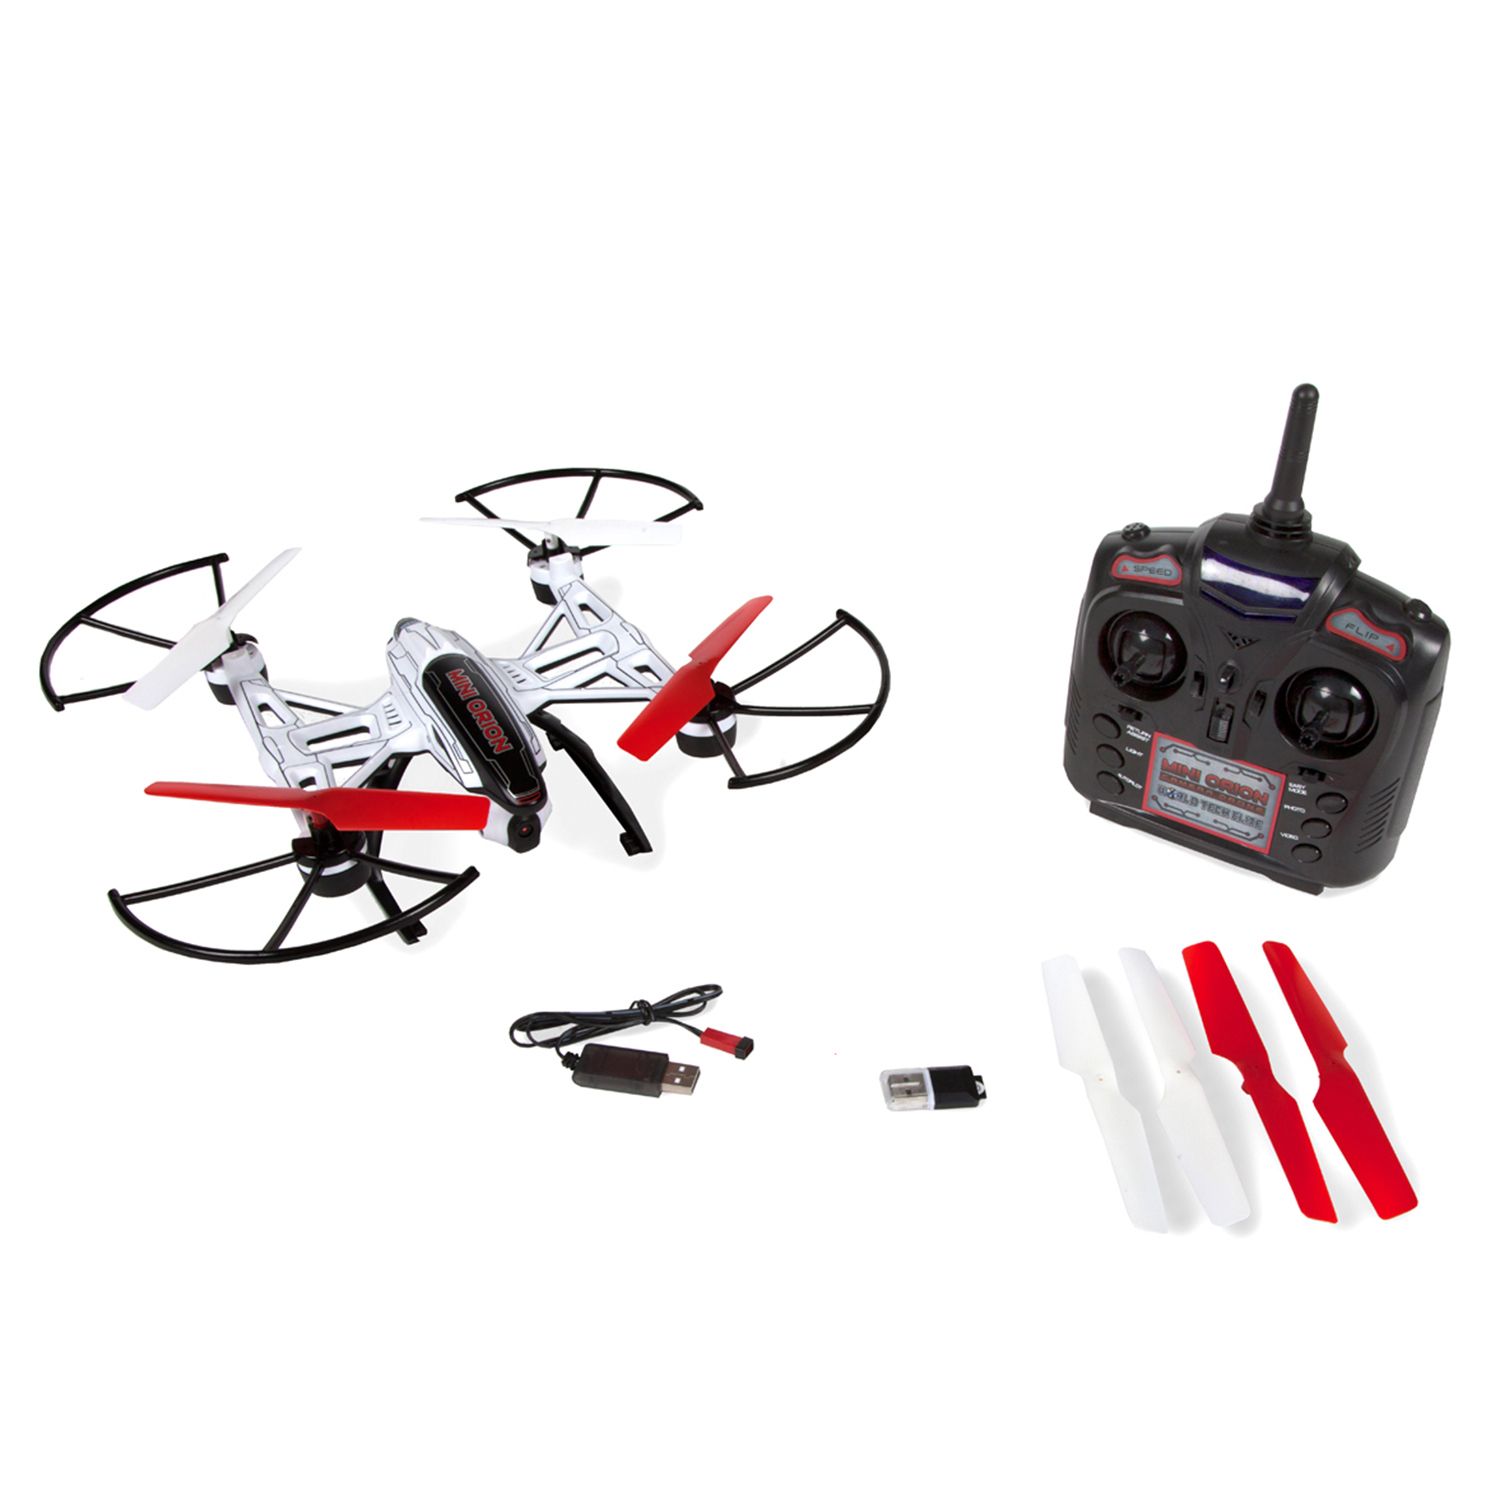 elite orion hd 2.4 ghz 4.5 ch rc camera drone by world tech toys